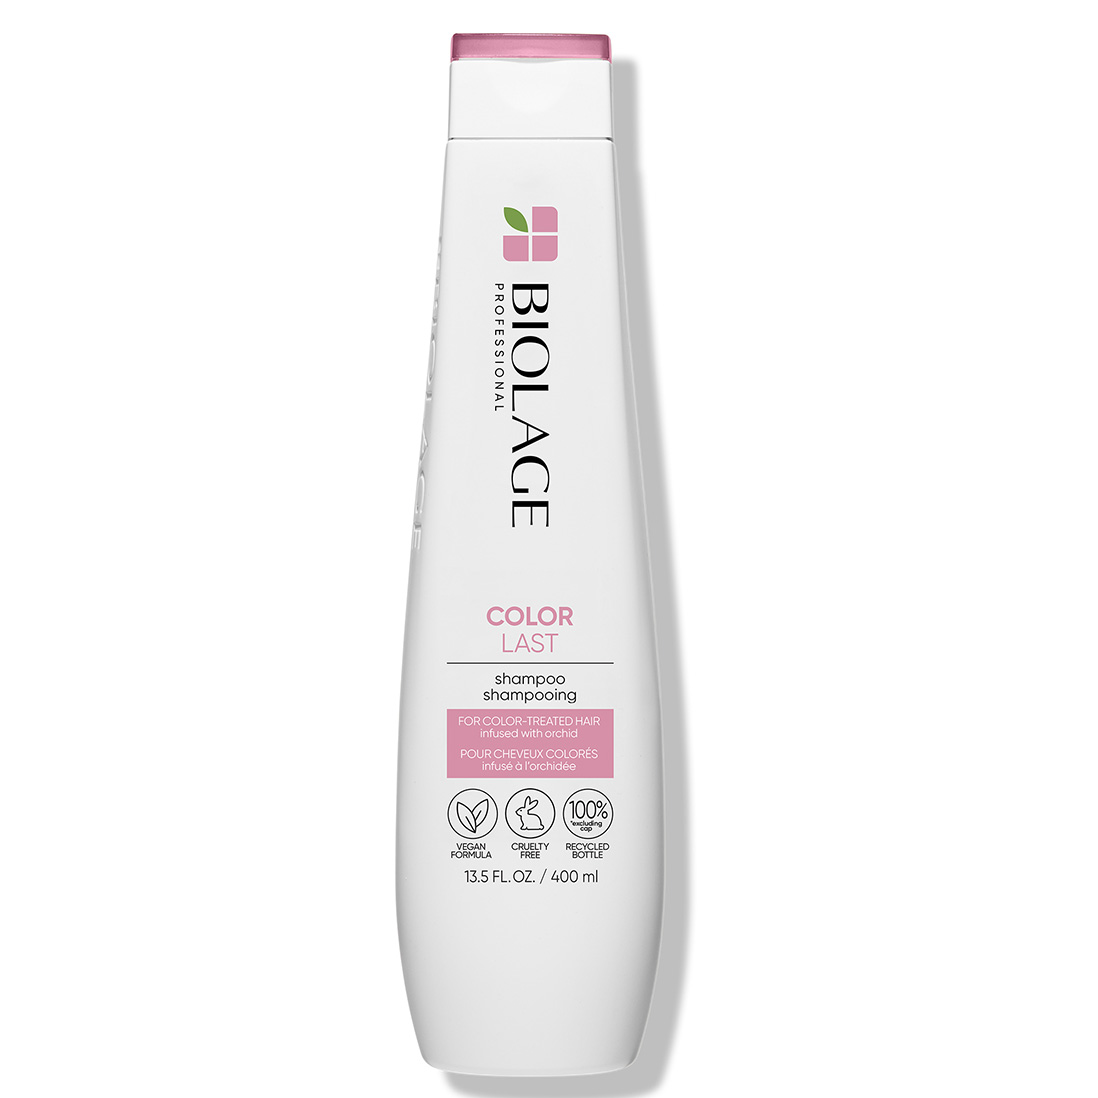 Hair Biolage Professional For Colored Color Shampoo Last |